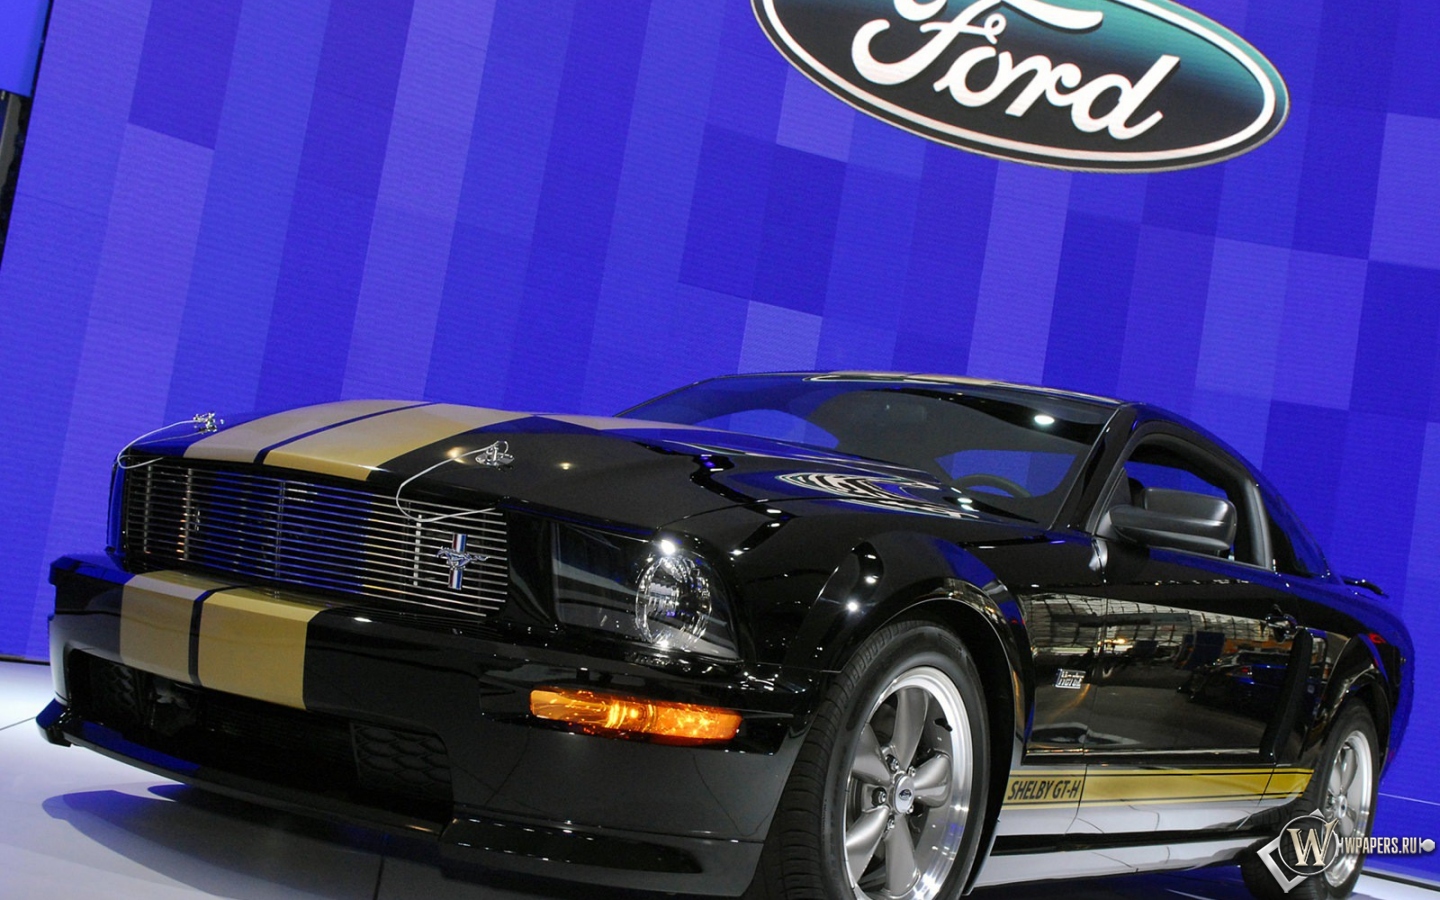 Ford Mustang Shelby GT-H 1440x900